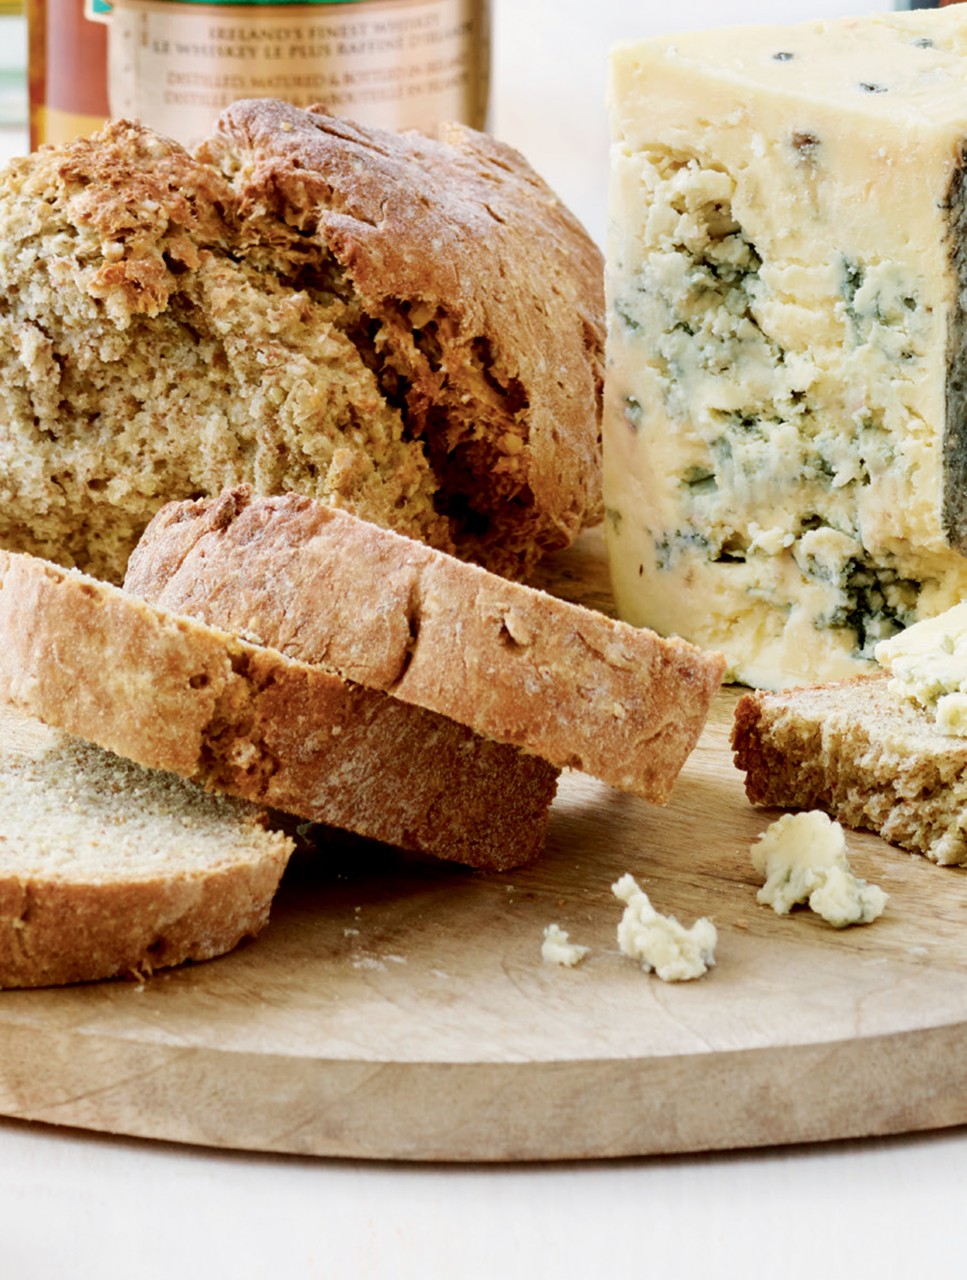 Brown Bread with Cashel Blue Cheese